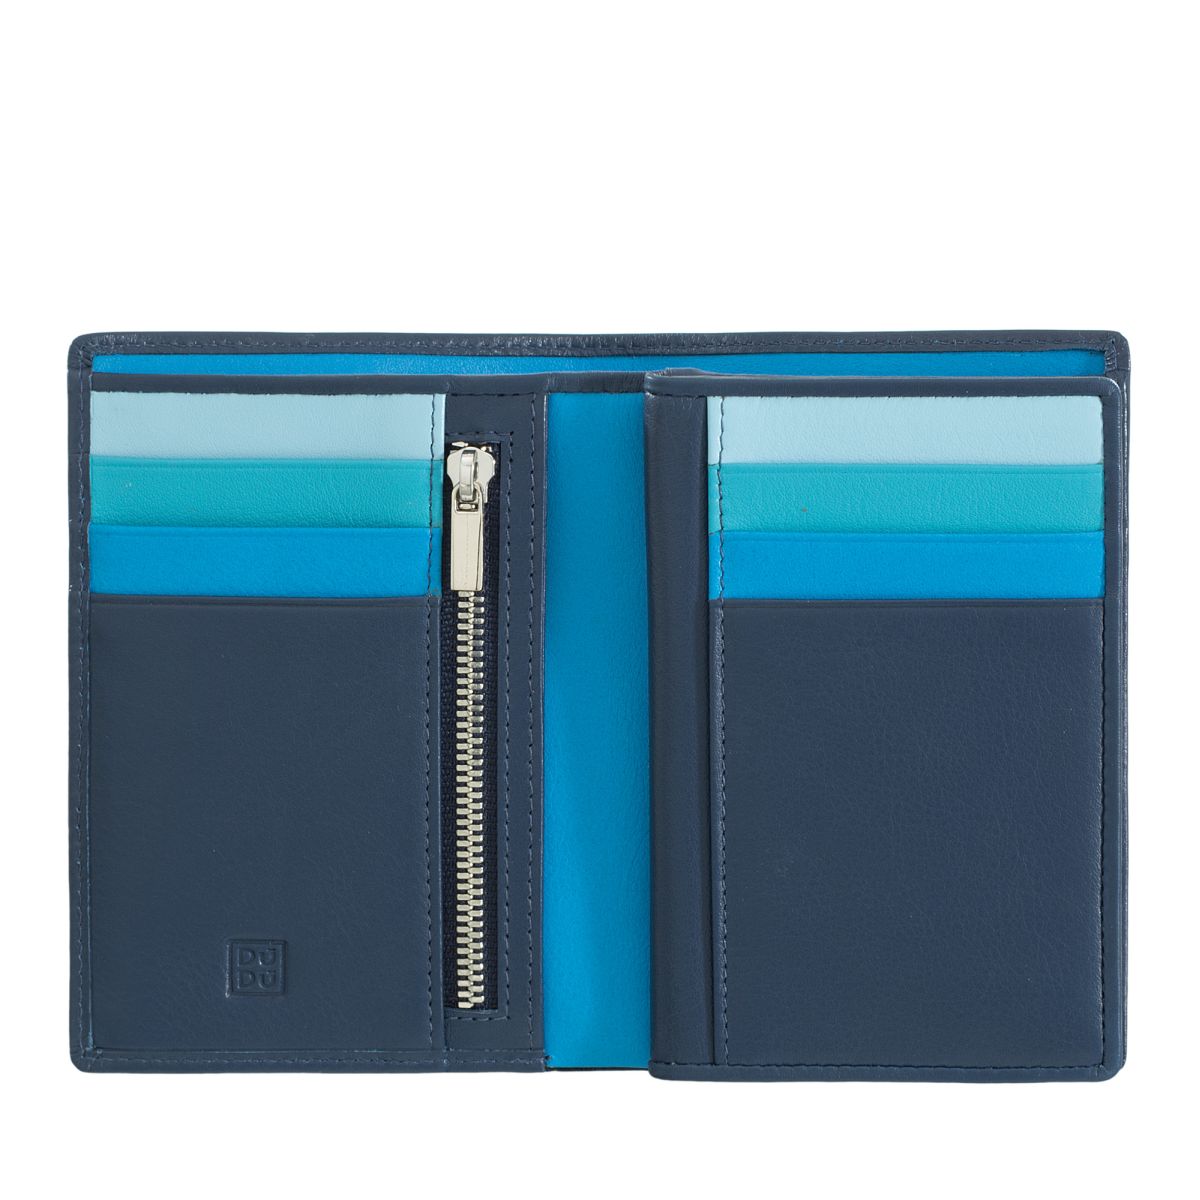 DuDu Mans leather folding wallet with inner zip - Blue